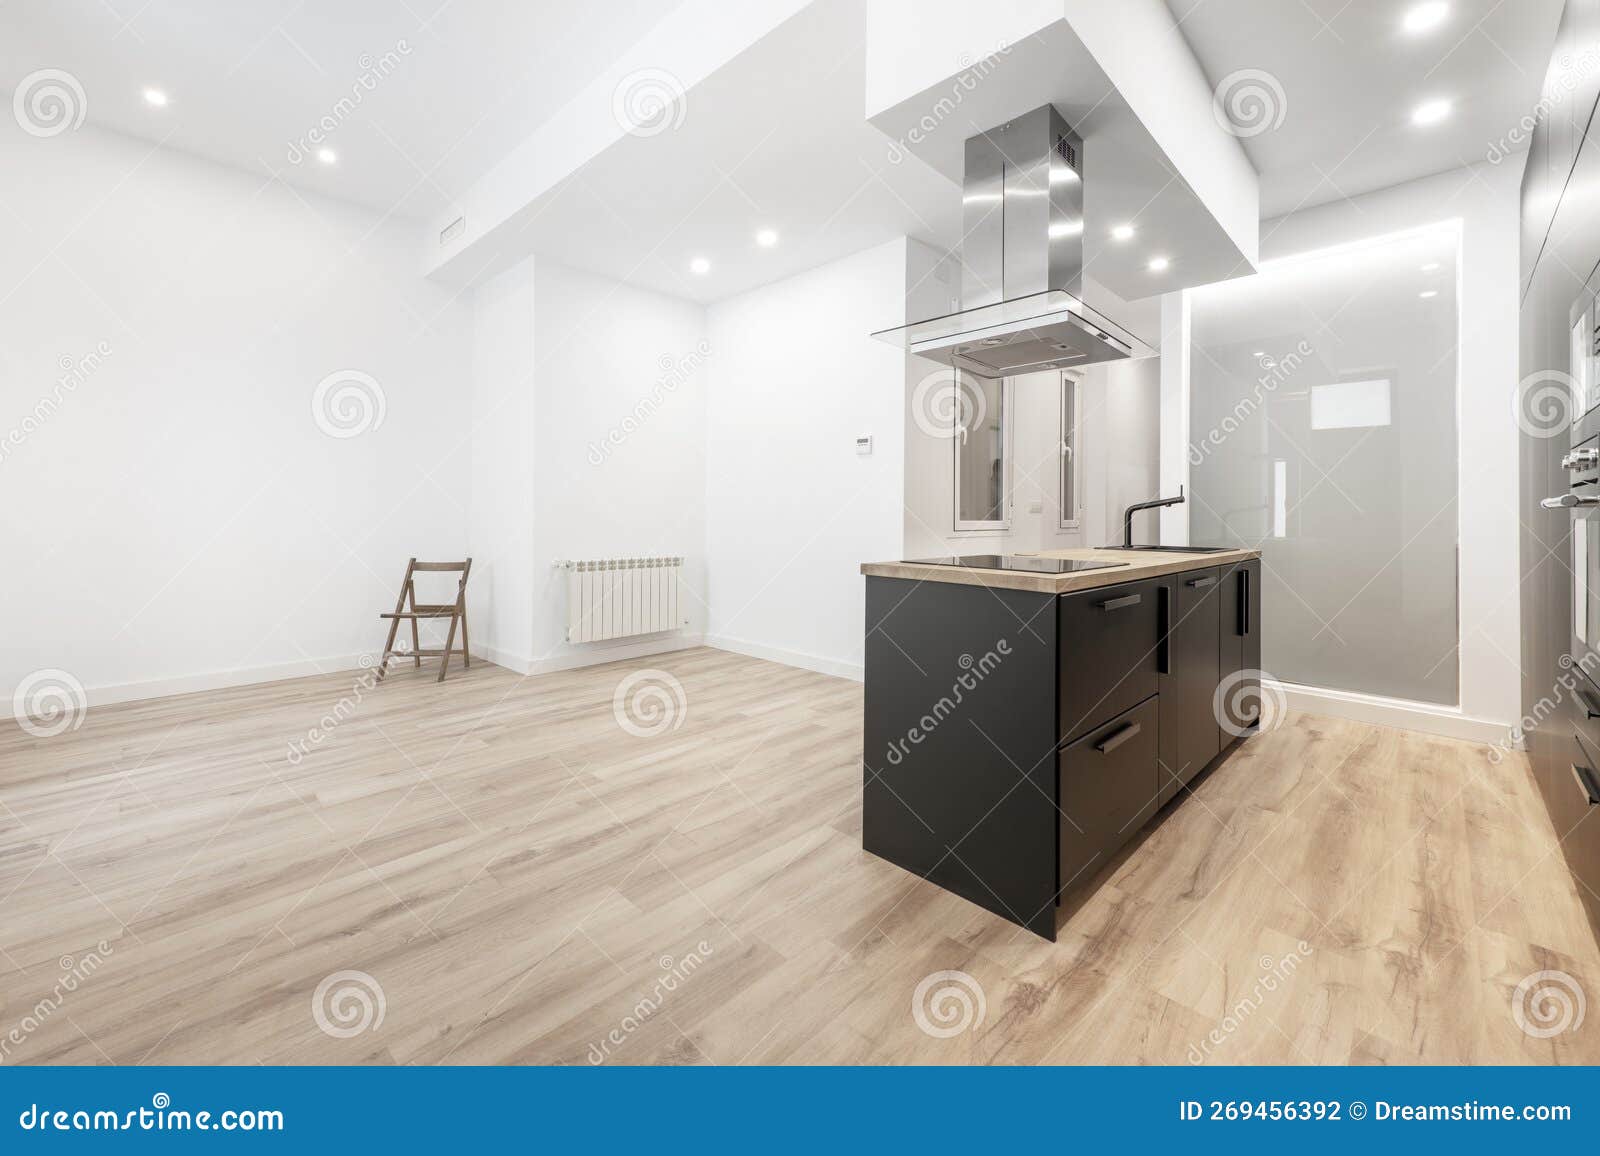 studio apartment with an open kitchen with an island with black furniture, a wooden worktop with a sink and a ceramic hob under